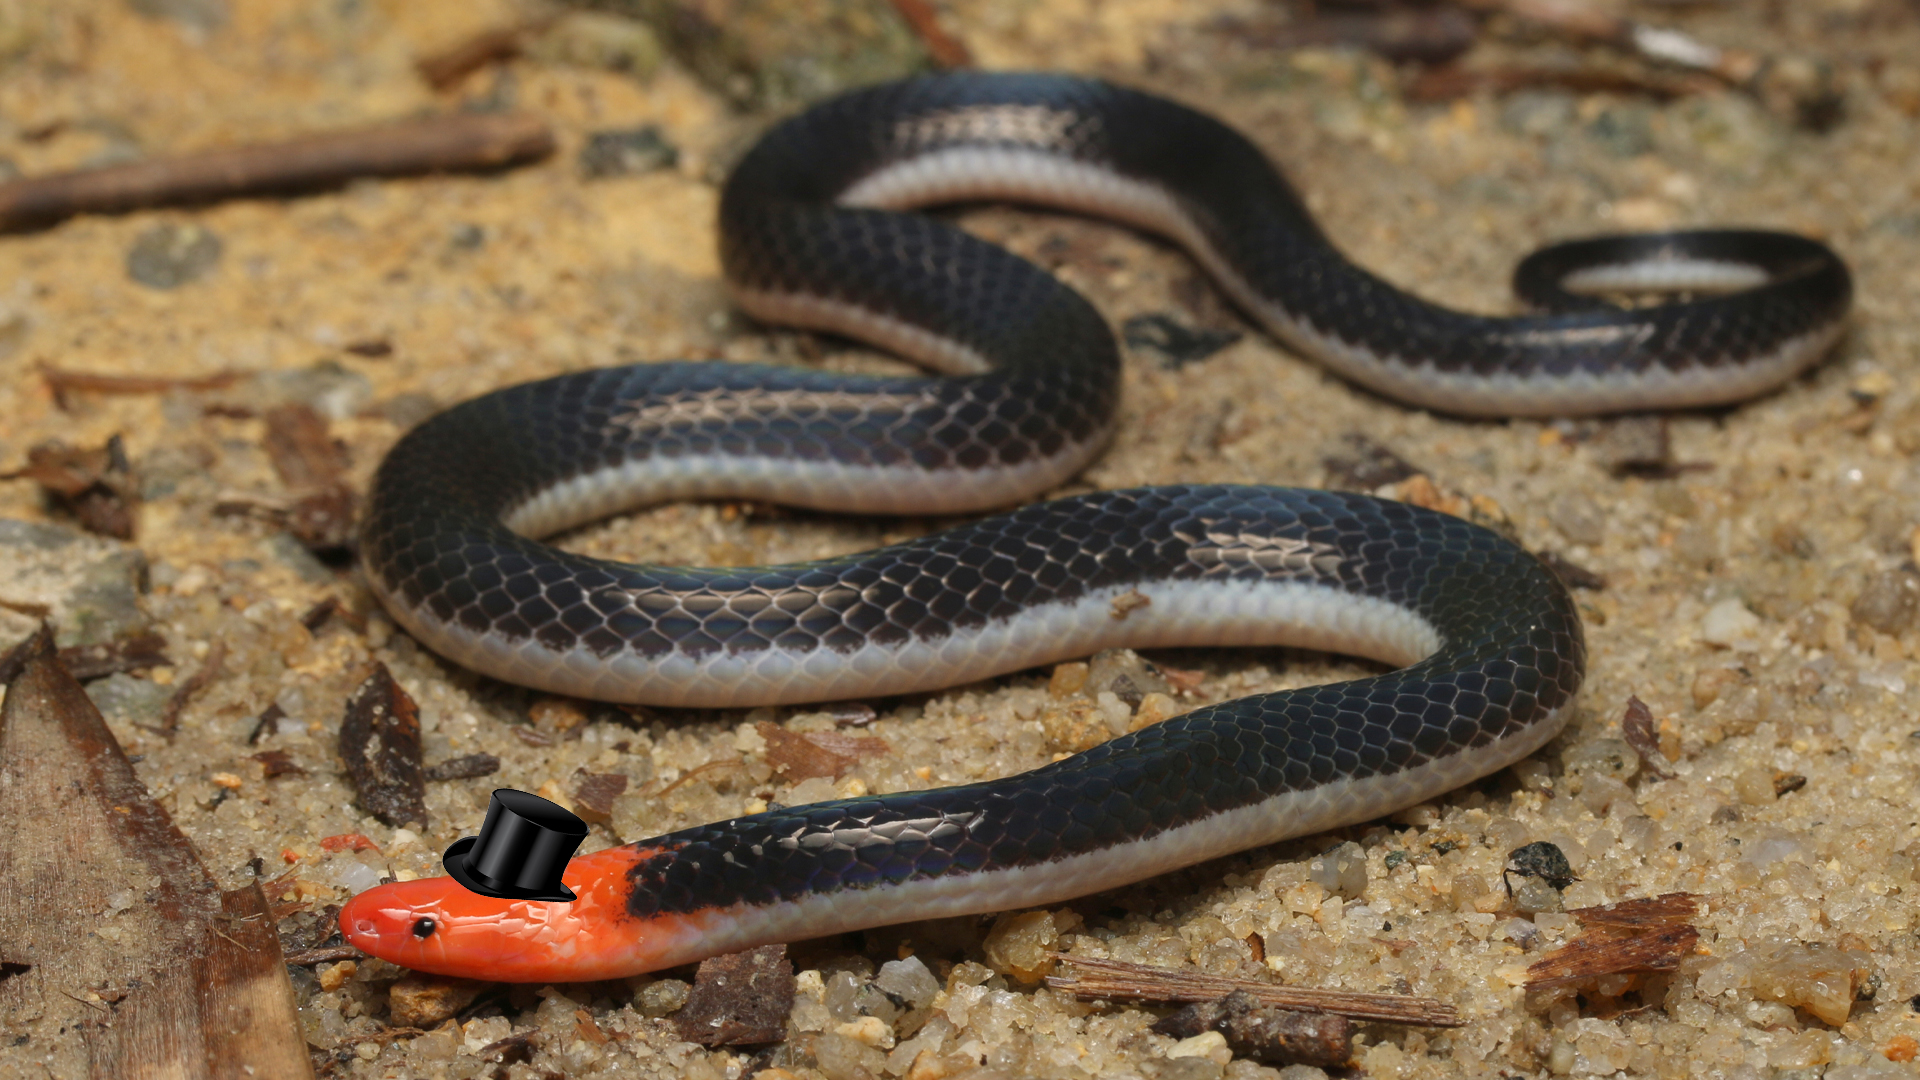 A red-headed reed snake